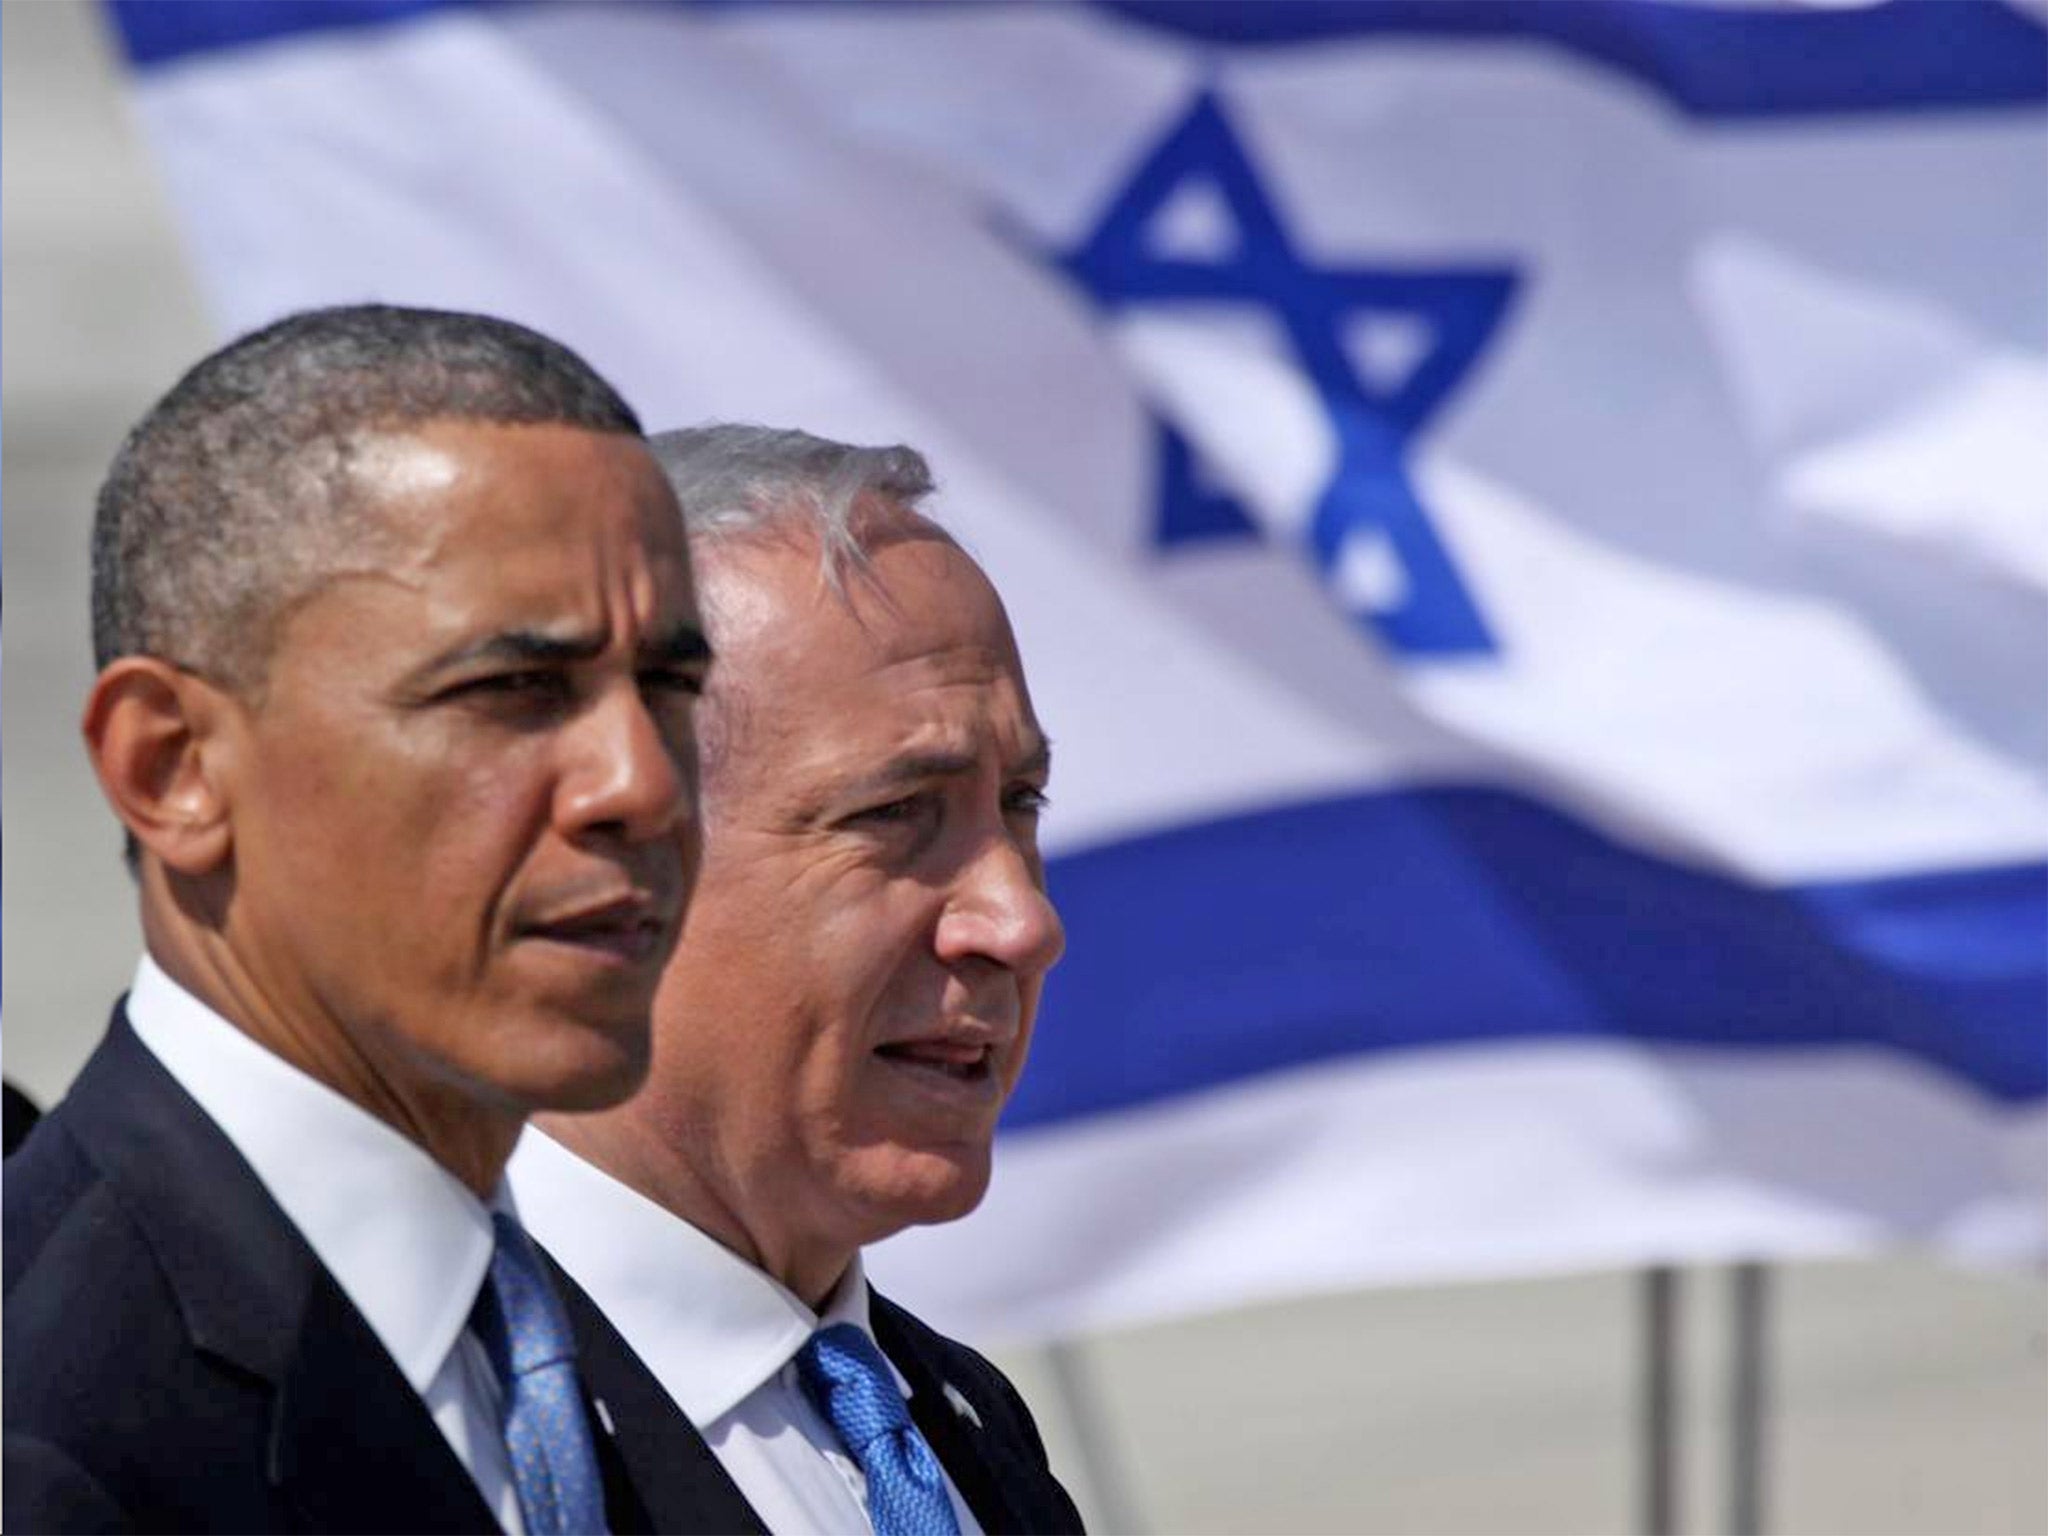 The relationship between Barack Obama and the Israeli PM Benjamin Netanyahu has become strained